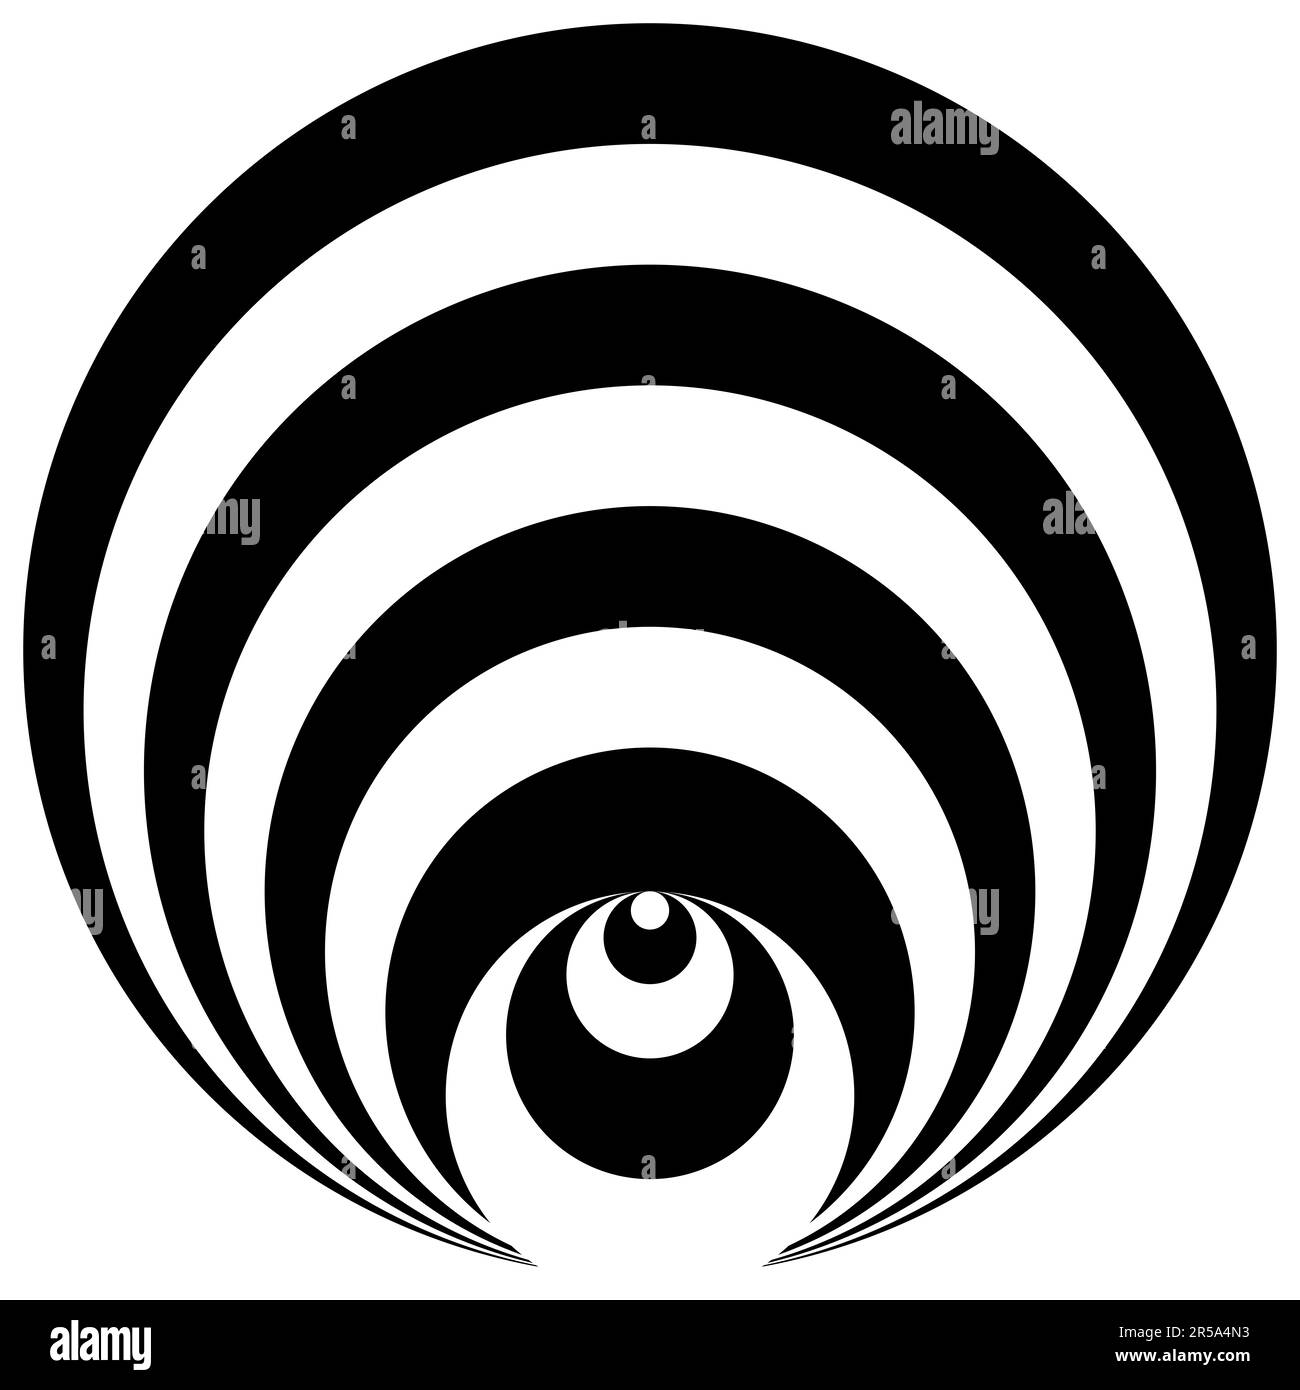 Abstract pattern. Concentric black and white overlapping circles. Misleading perception of perspective. Stock Photo